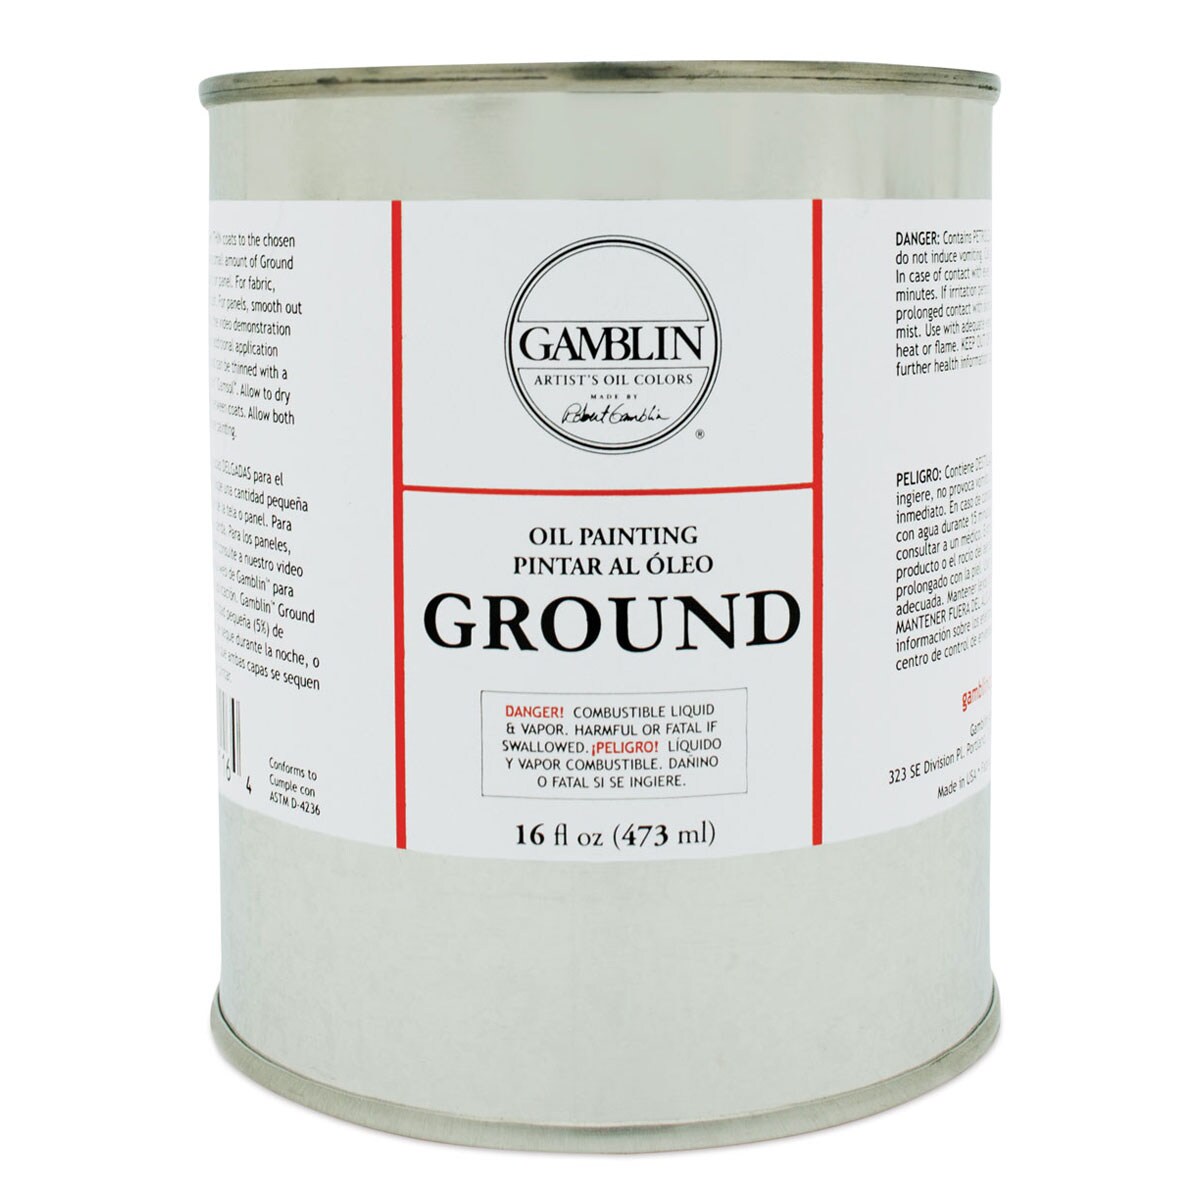 Gamblin Painting Ground - 16 oz can